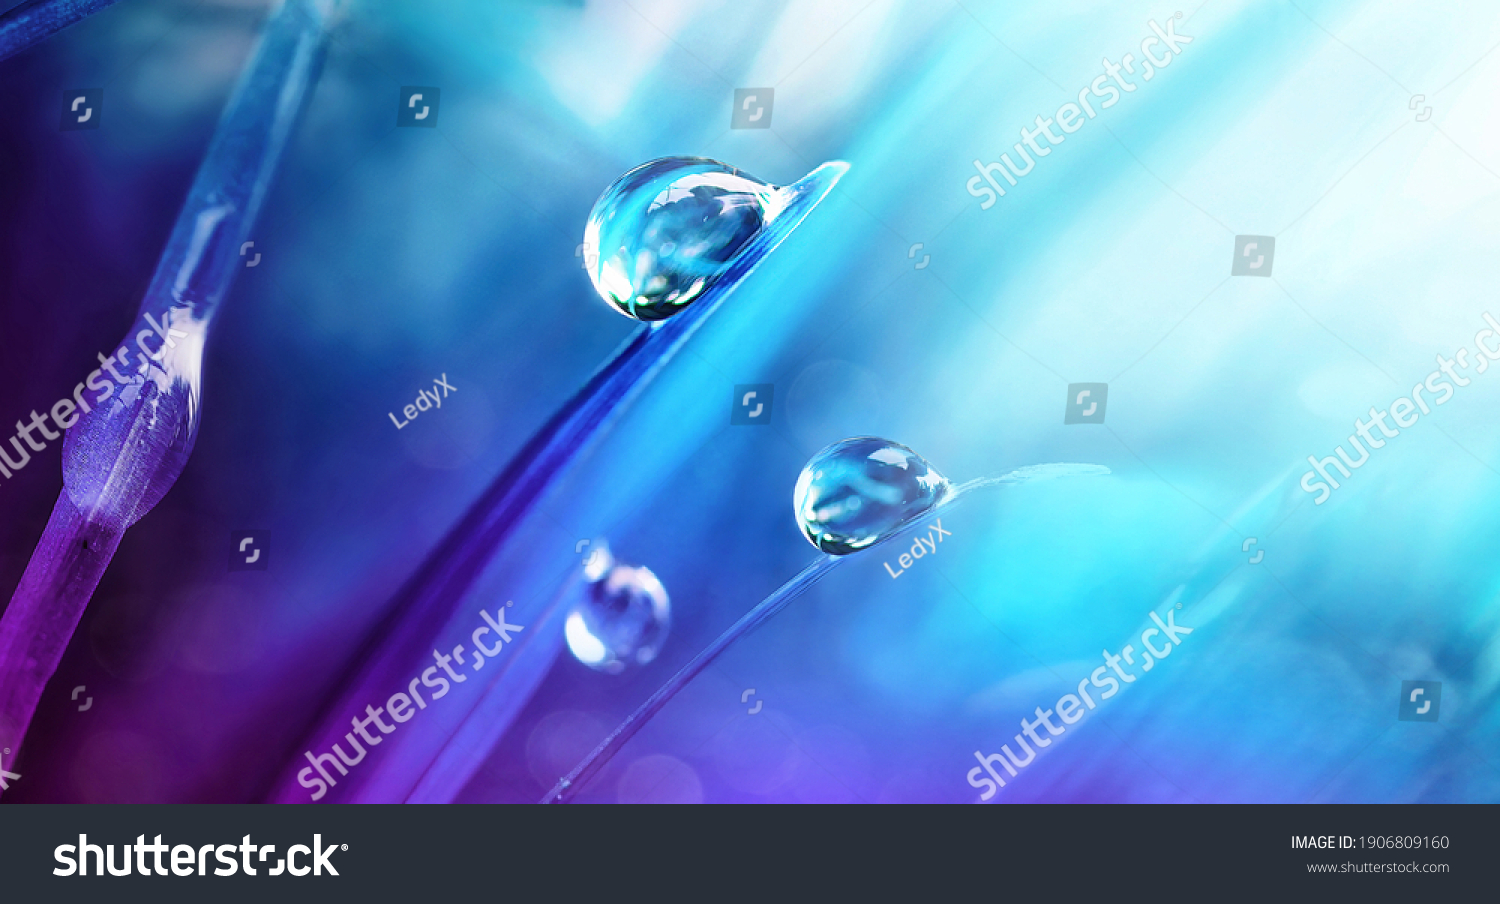 Beautiful large drops of morning dew in spring nature, selective focus. Drops transparent water on grass macro. Bright artistic image in blue and purple tones. #1906809160